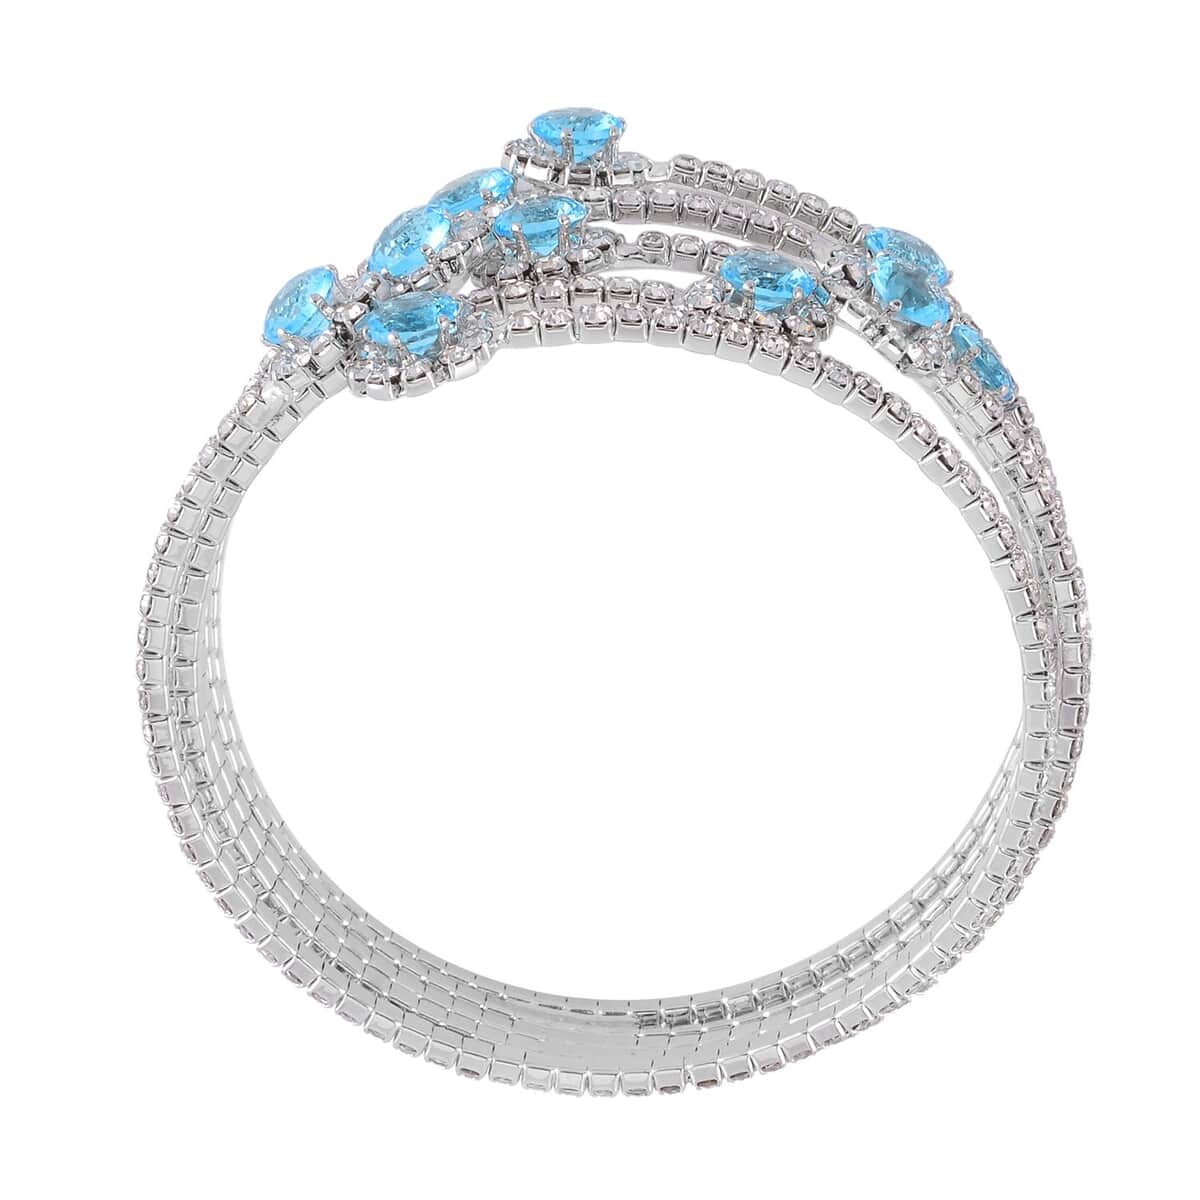 Sky Blue and White Color Austrian Crystal Bangle Bracelet (7-7.5 In) and Earrings in Silvertone image number 5